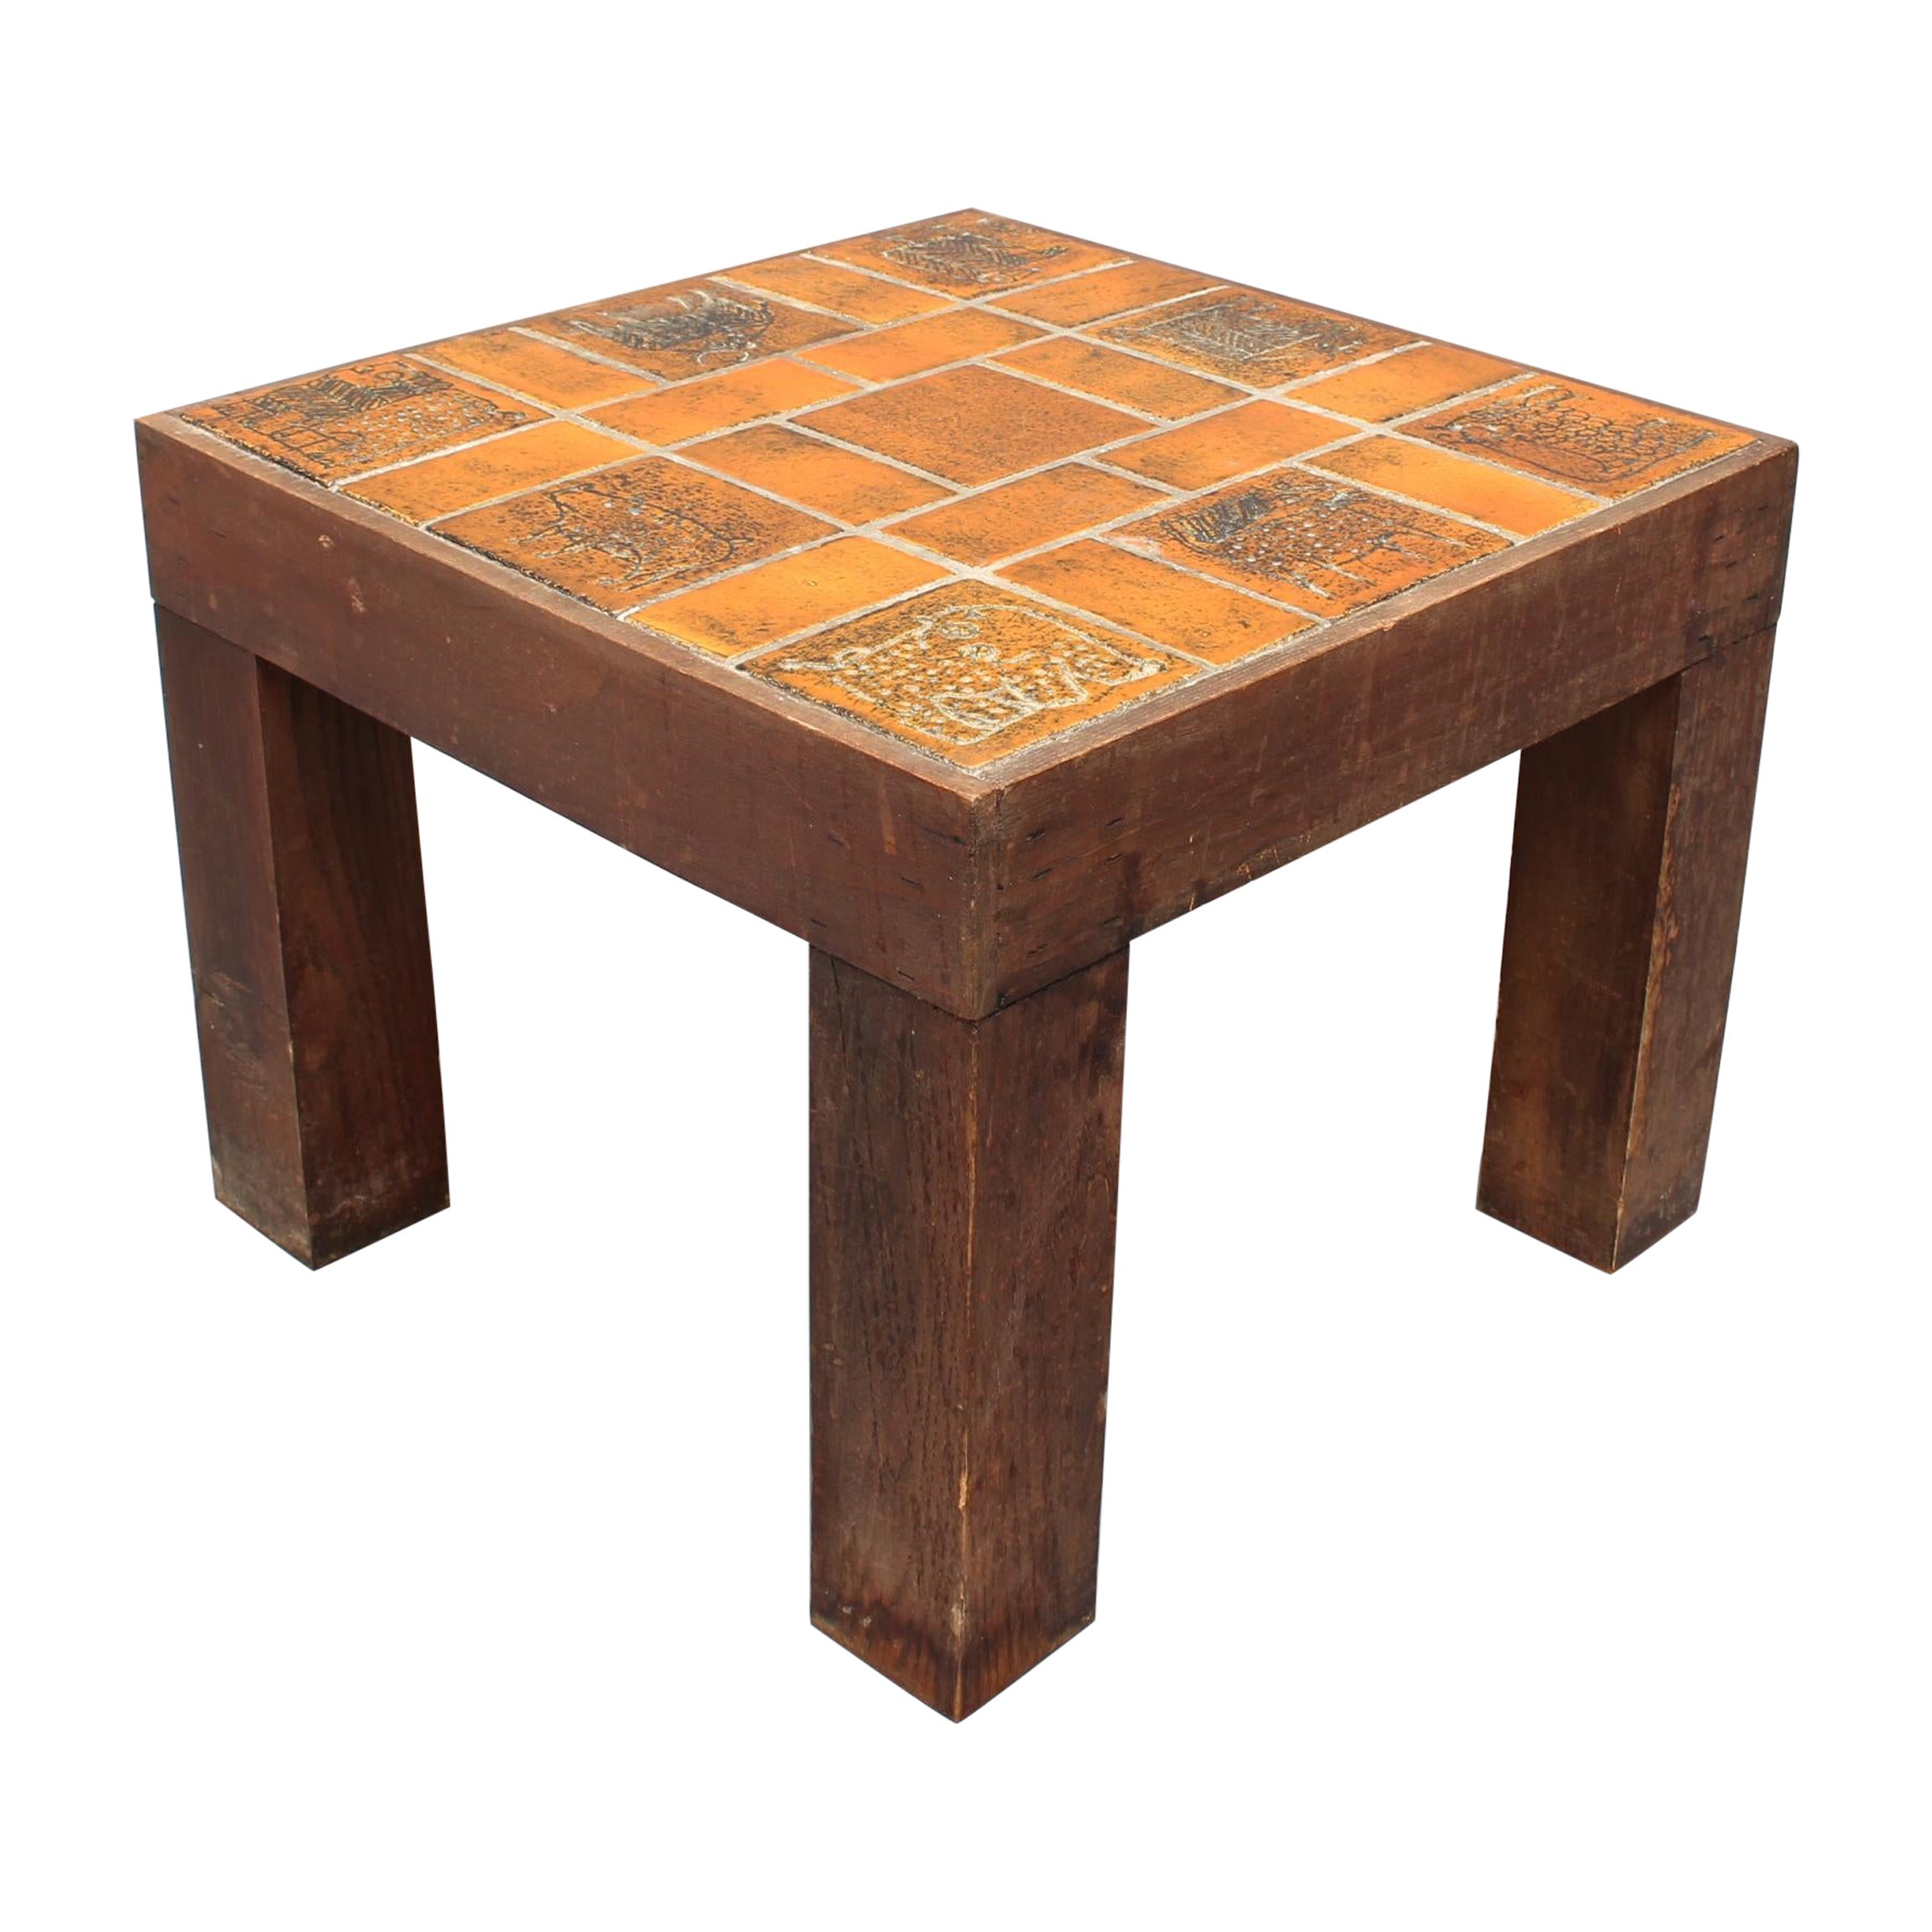 Vintage French Square Side Table with Ceramic Tile Top by Jacques Blin, c. 1950s For Sale